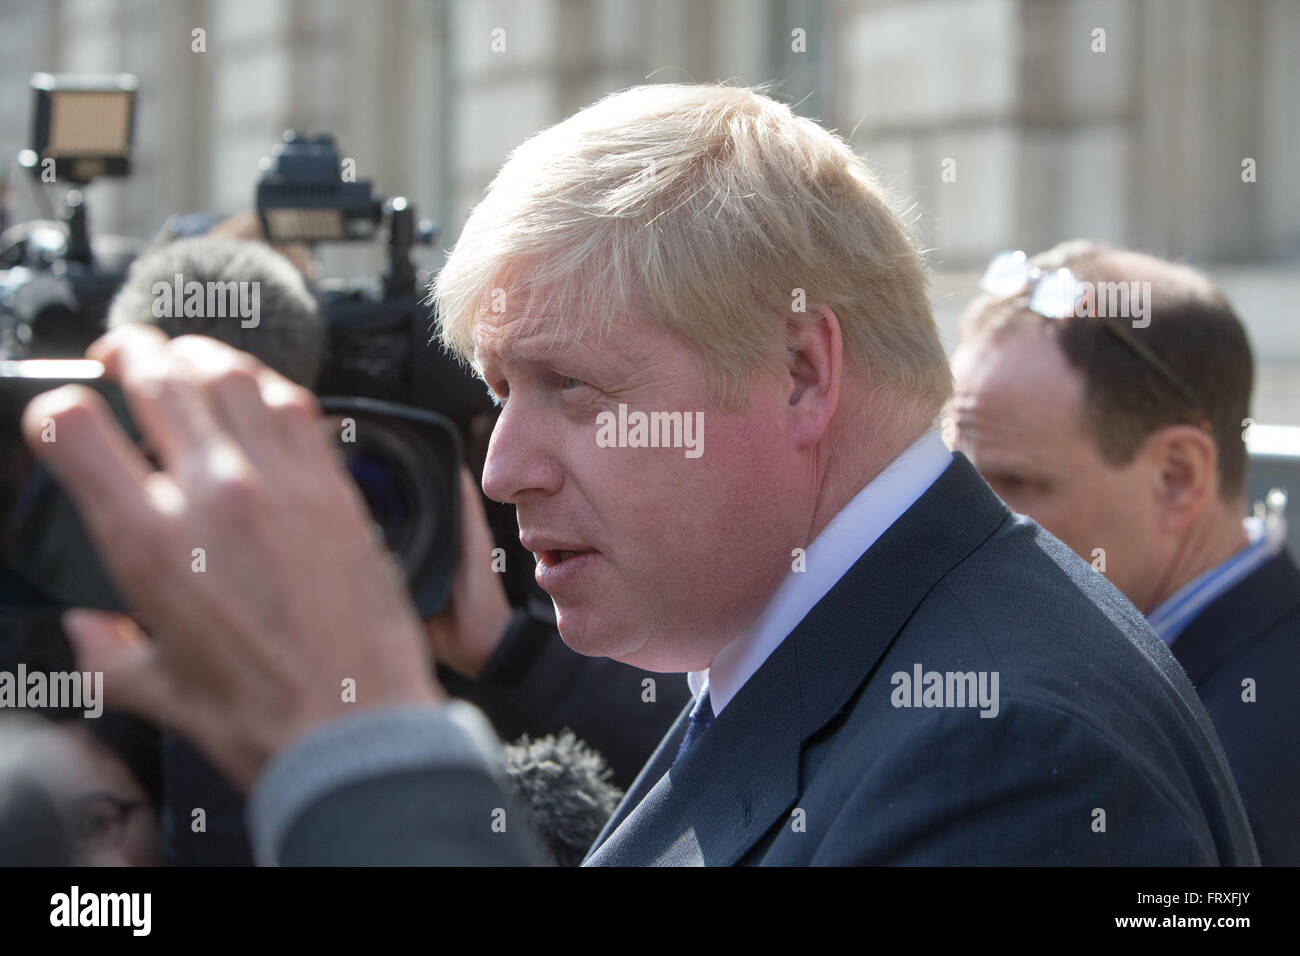 Boris Johnson,Mayor of London and MP for Uxbridge and South Ruislip,at Number 10 Downing Street for a Cabinet meeting Stock Photo